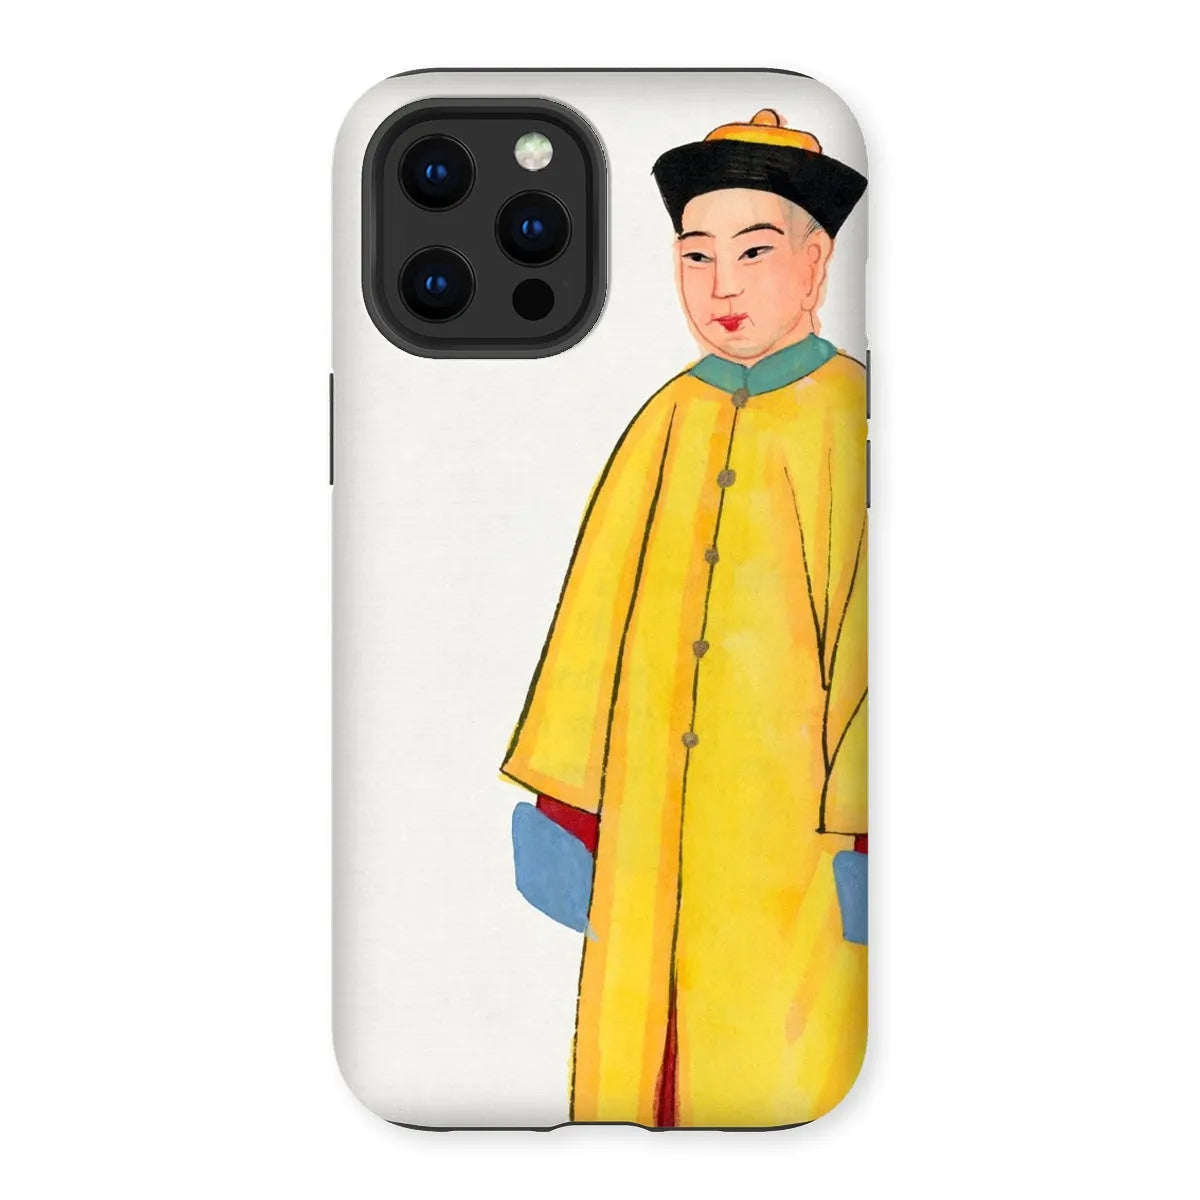 Priest In Yellow Robes - Chinese Aesthetic Art Phone Case - Iphone 13 Pro Max / Matte - Mobile Phone Cases - Aesthetic